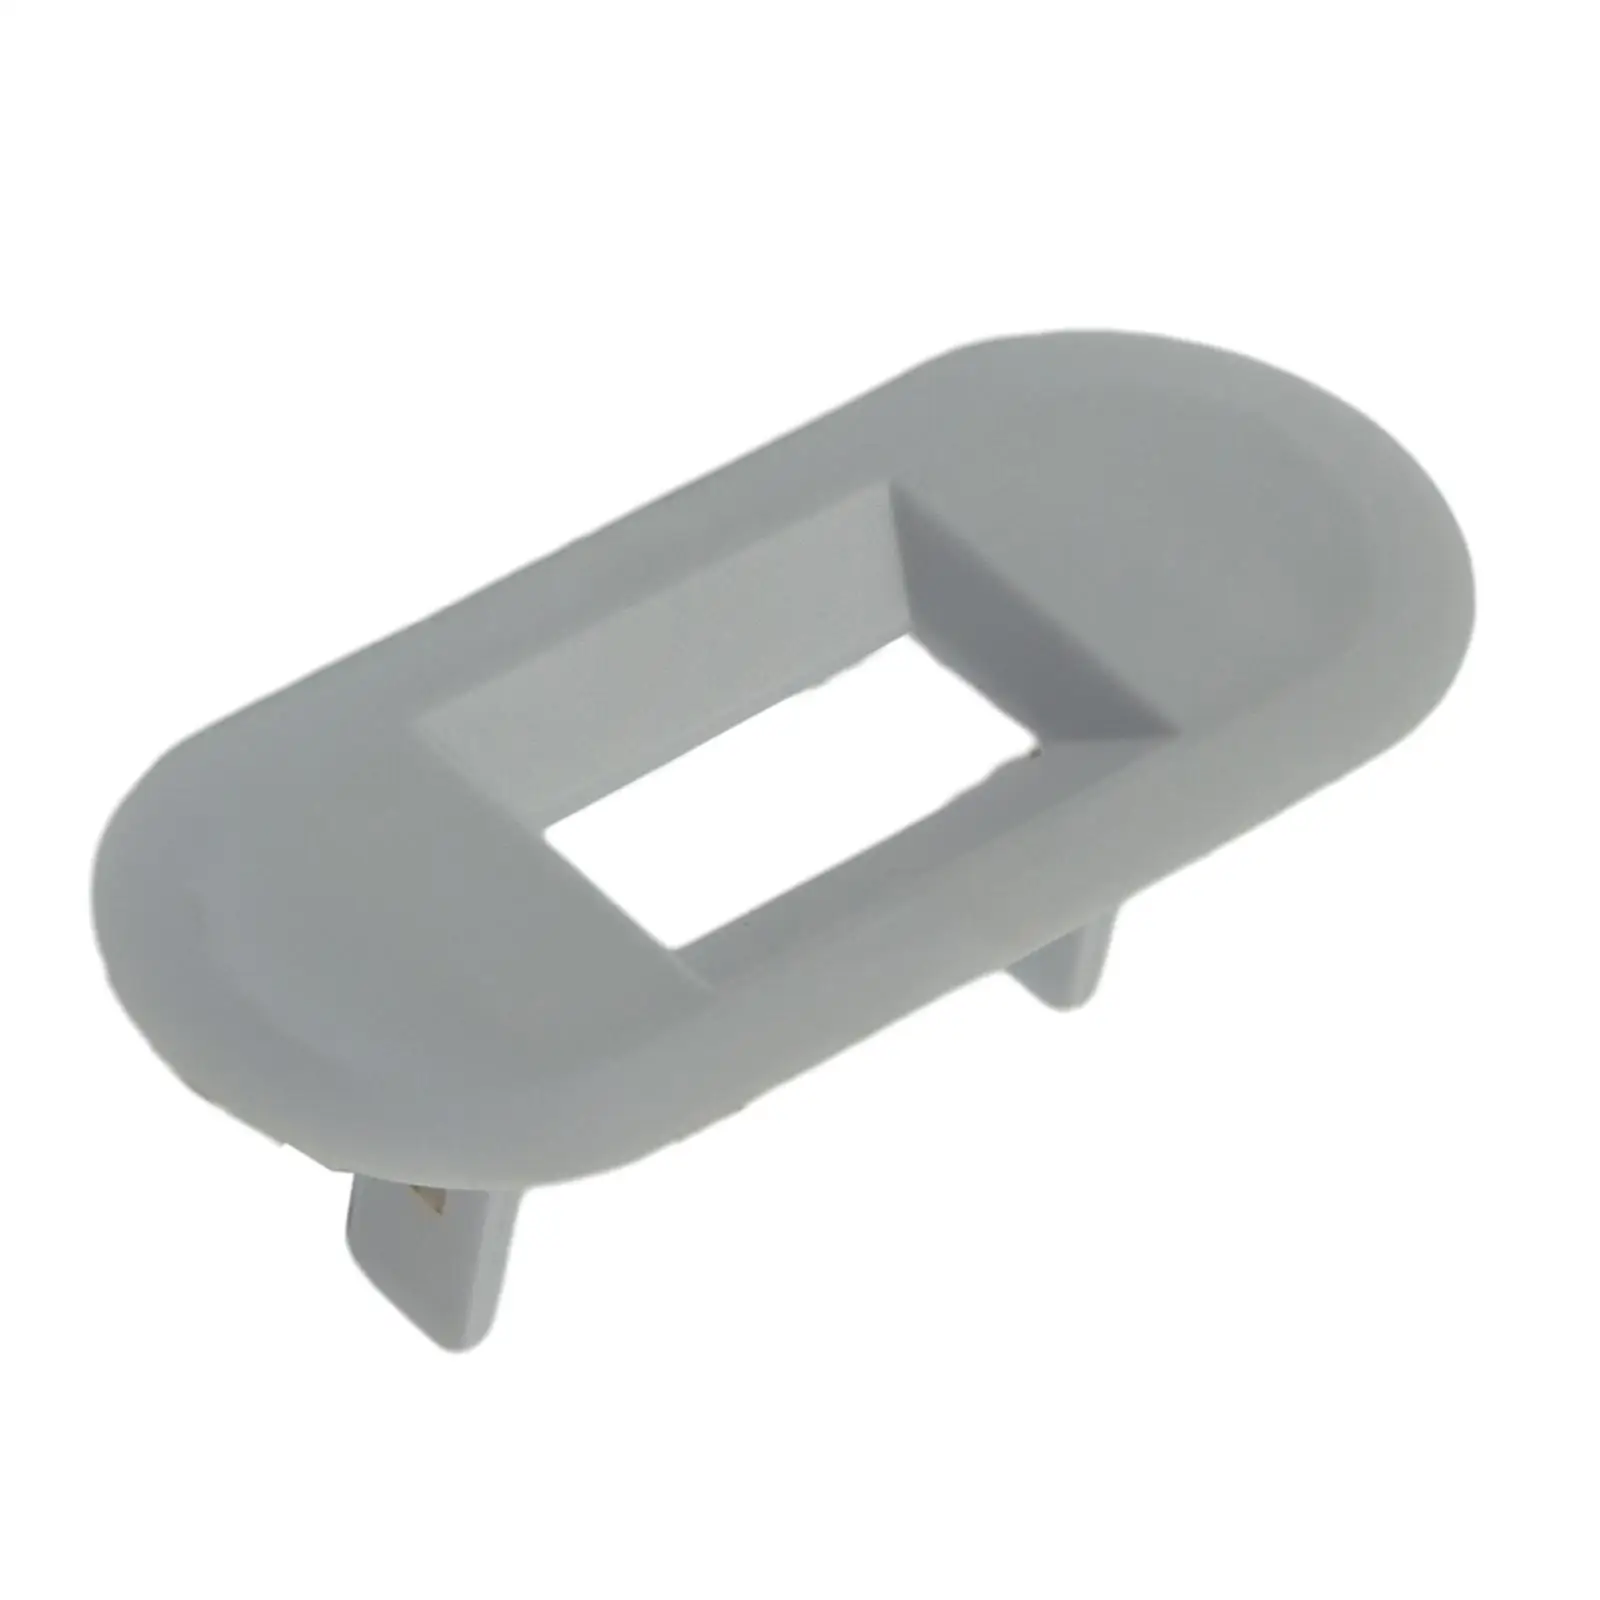 Clothes Washer Lid Lock Bezel, Top Load, Replacement Part, Durable Washer Accessories WH01x24381 4502680 for Washer